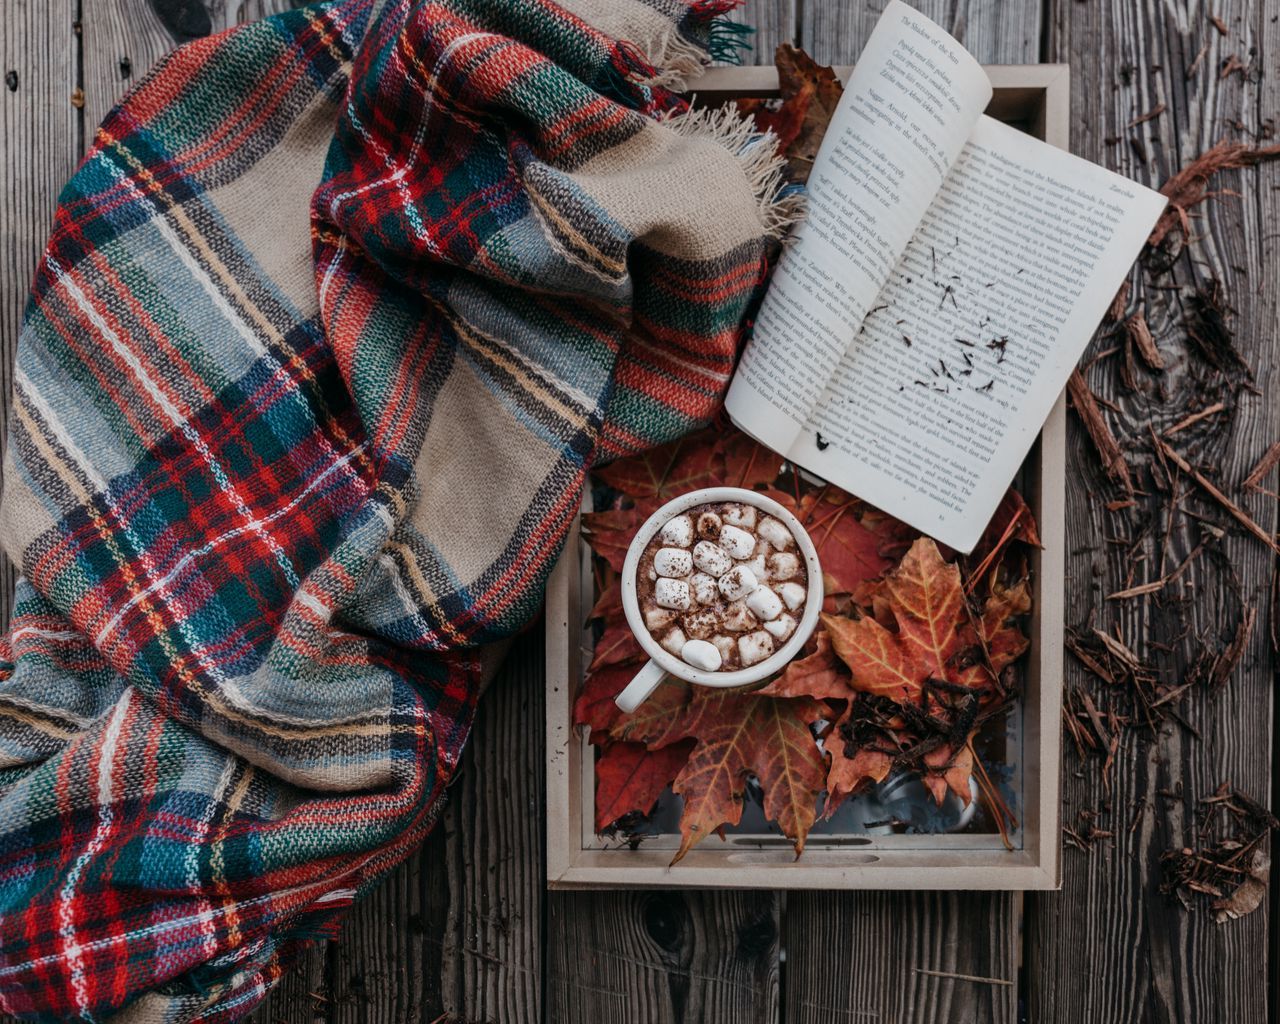 A book, mug and blanket on top of leaves - Fall, marshmallows